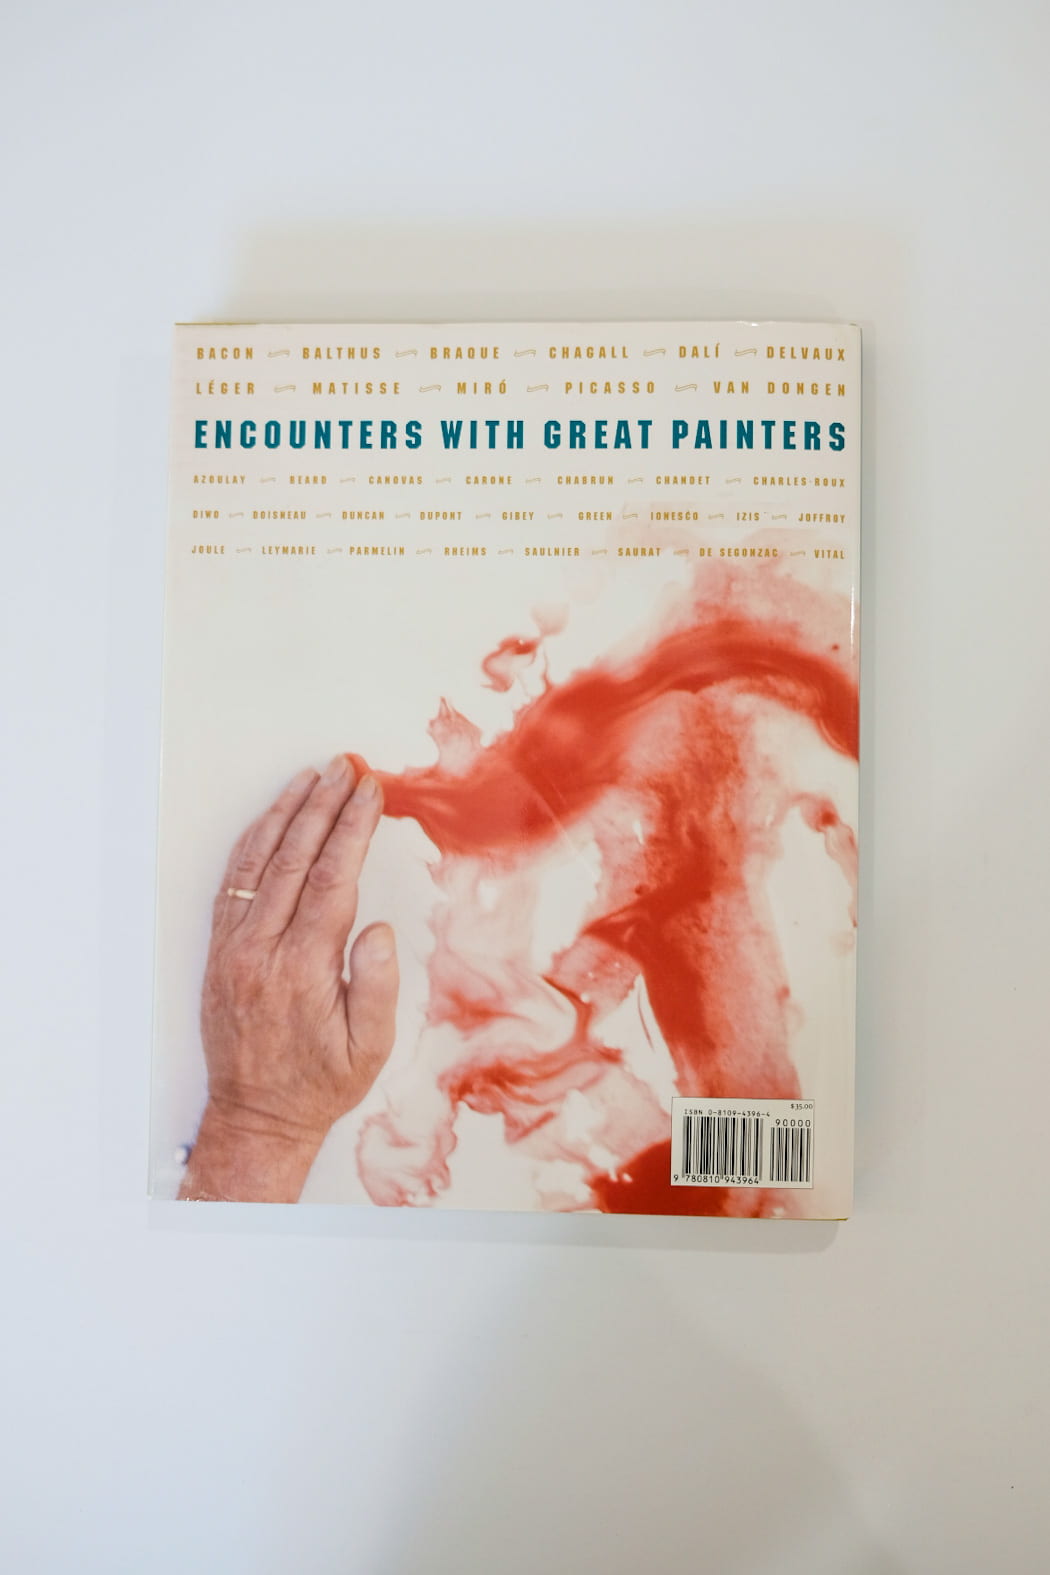 Encounters With Great Painters by Roger Thérond